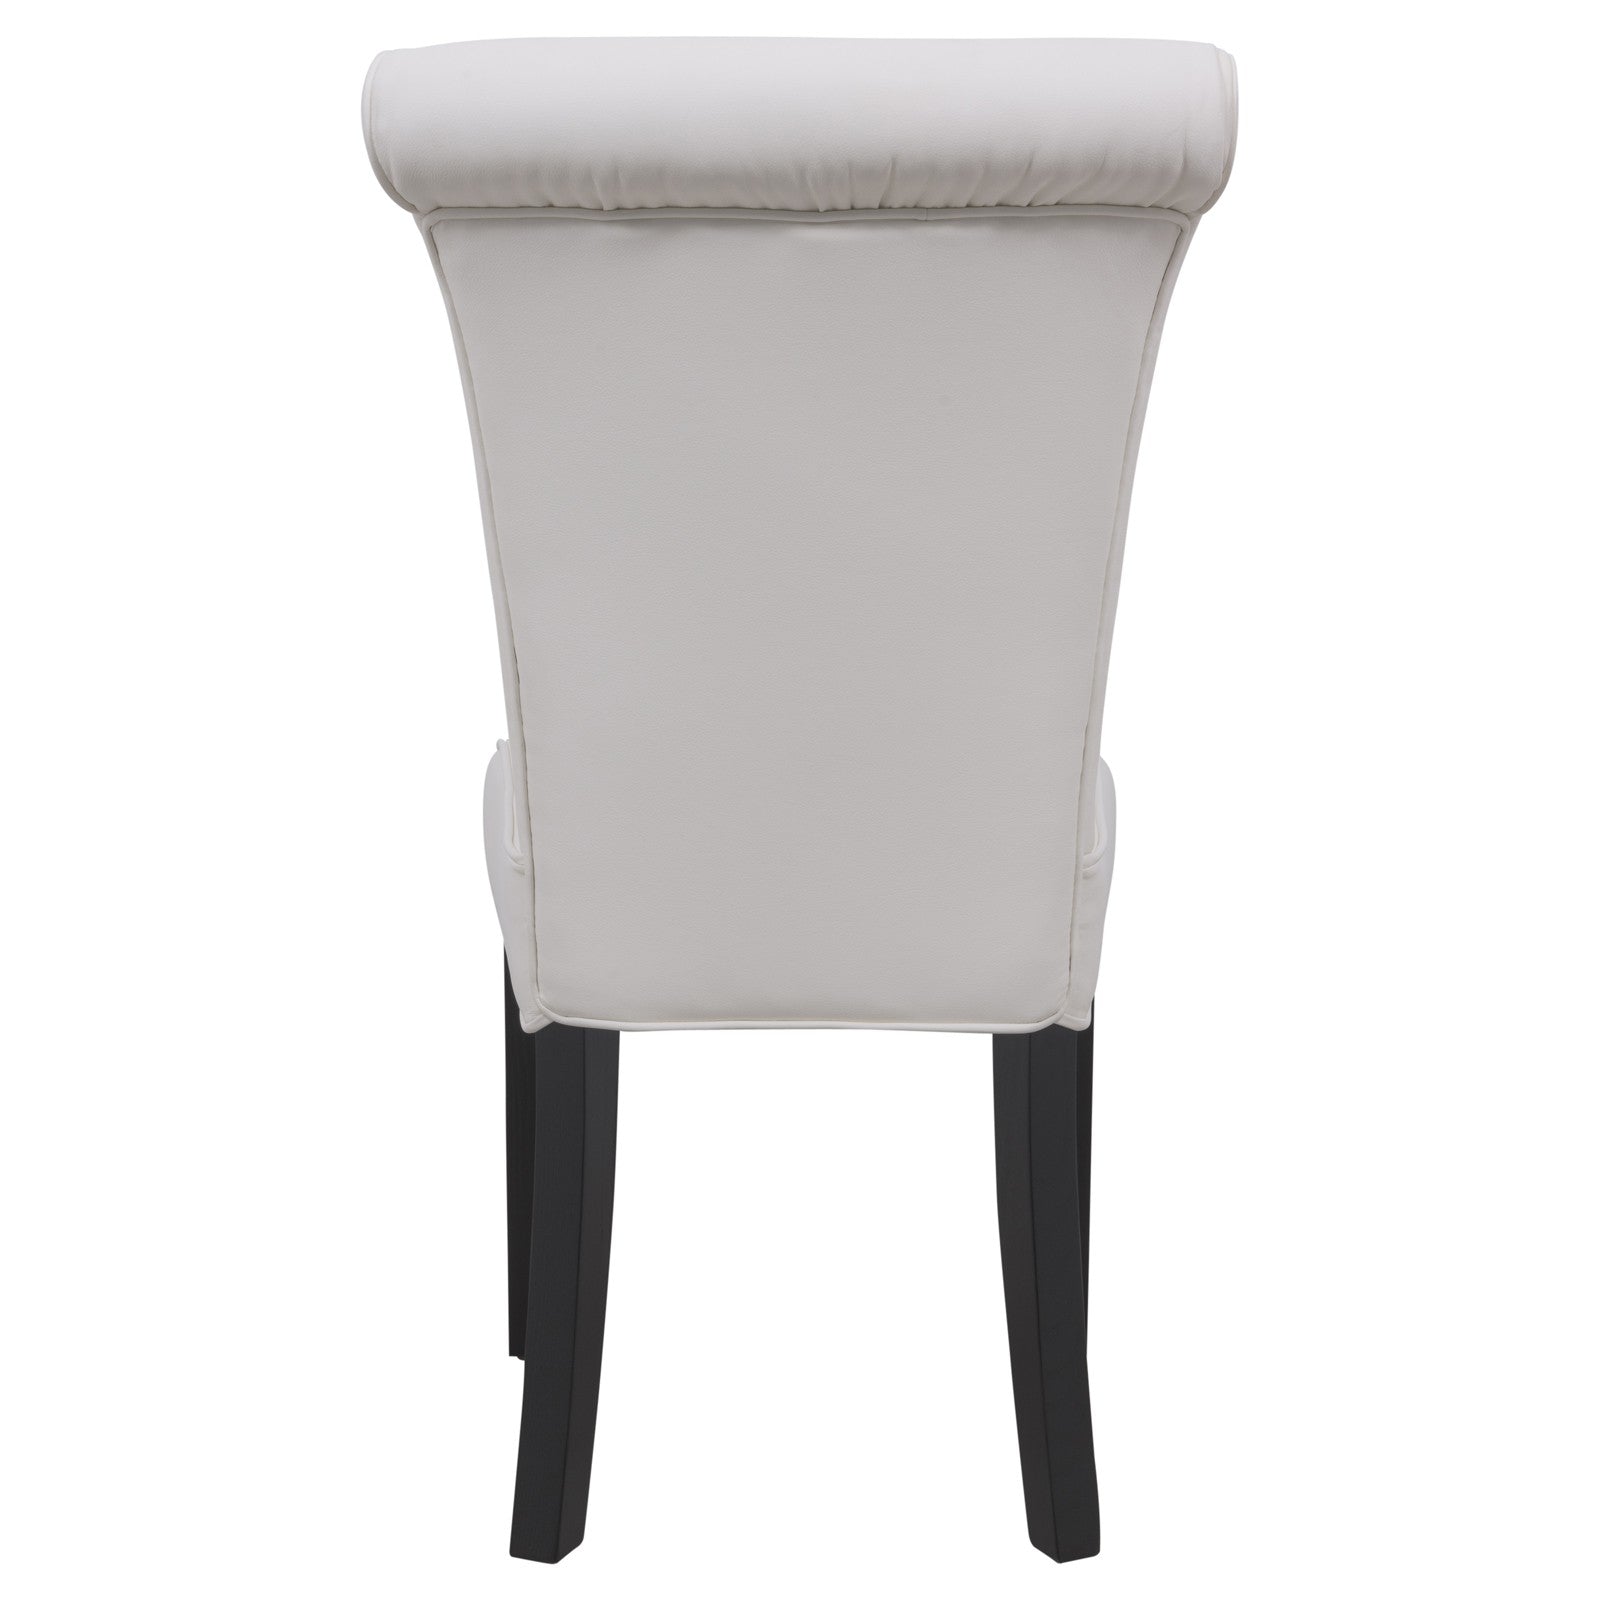 Edith White Vinyl Leather Dining Chair - living-essentials